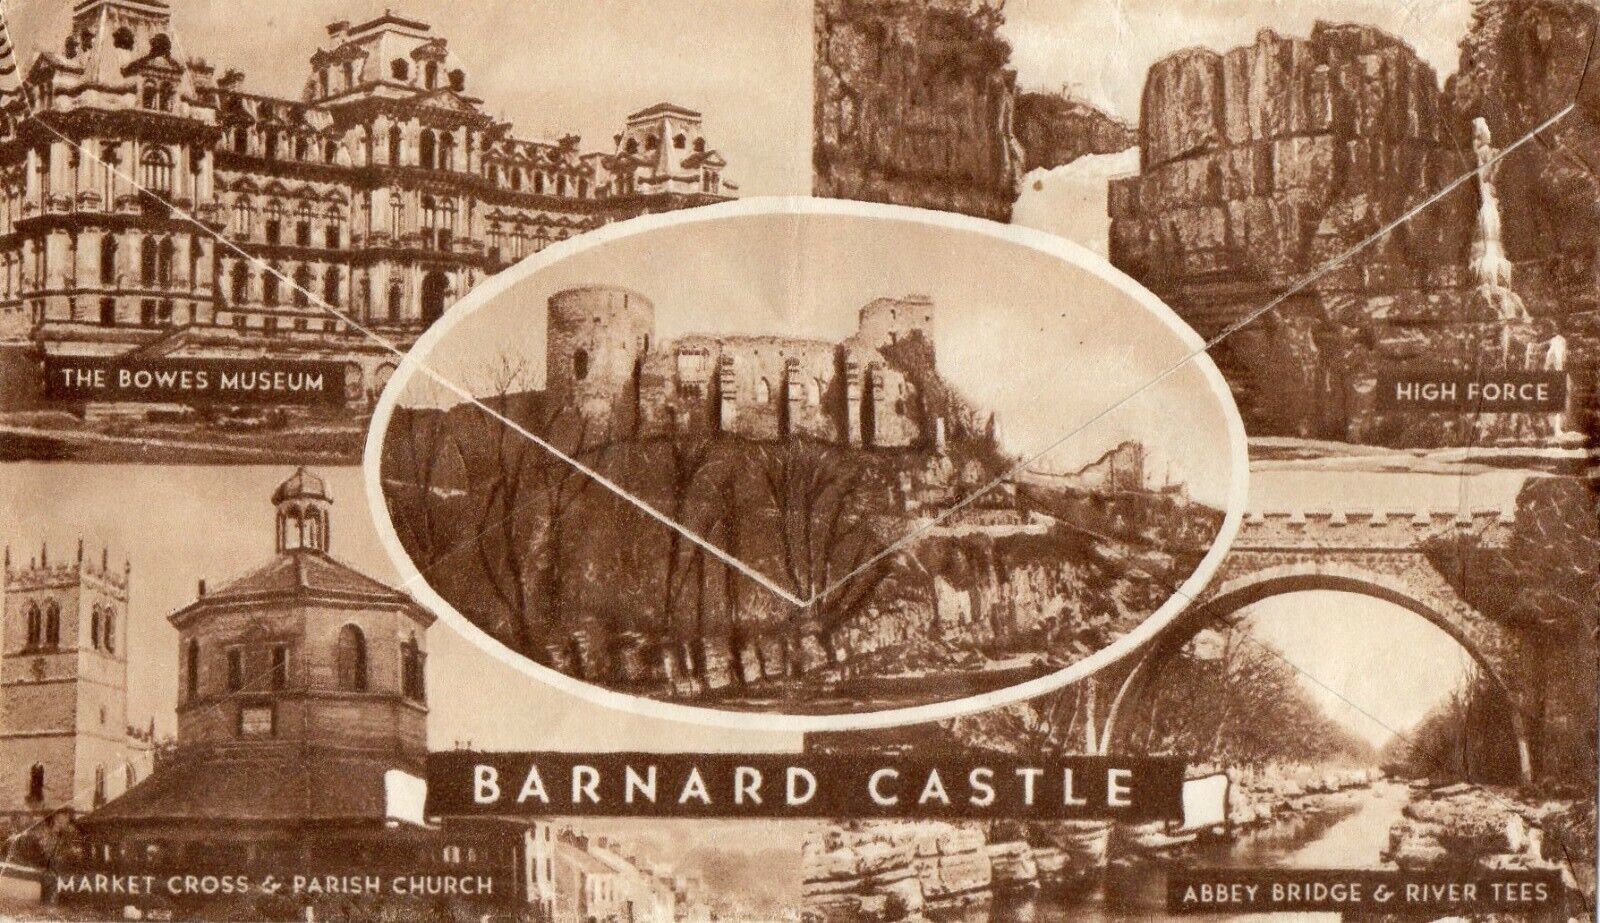 House Clearance - VINTAGE SECTIONAL VIEW ENVELOPE OF BARNARD CASTLE, Co DURHAM - V/G CONDITION.